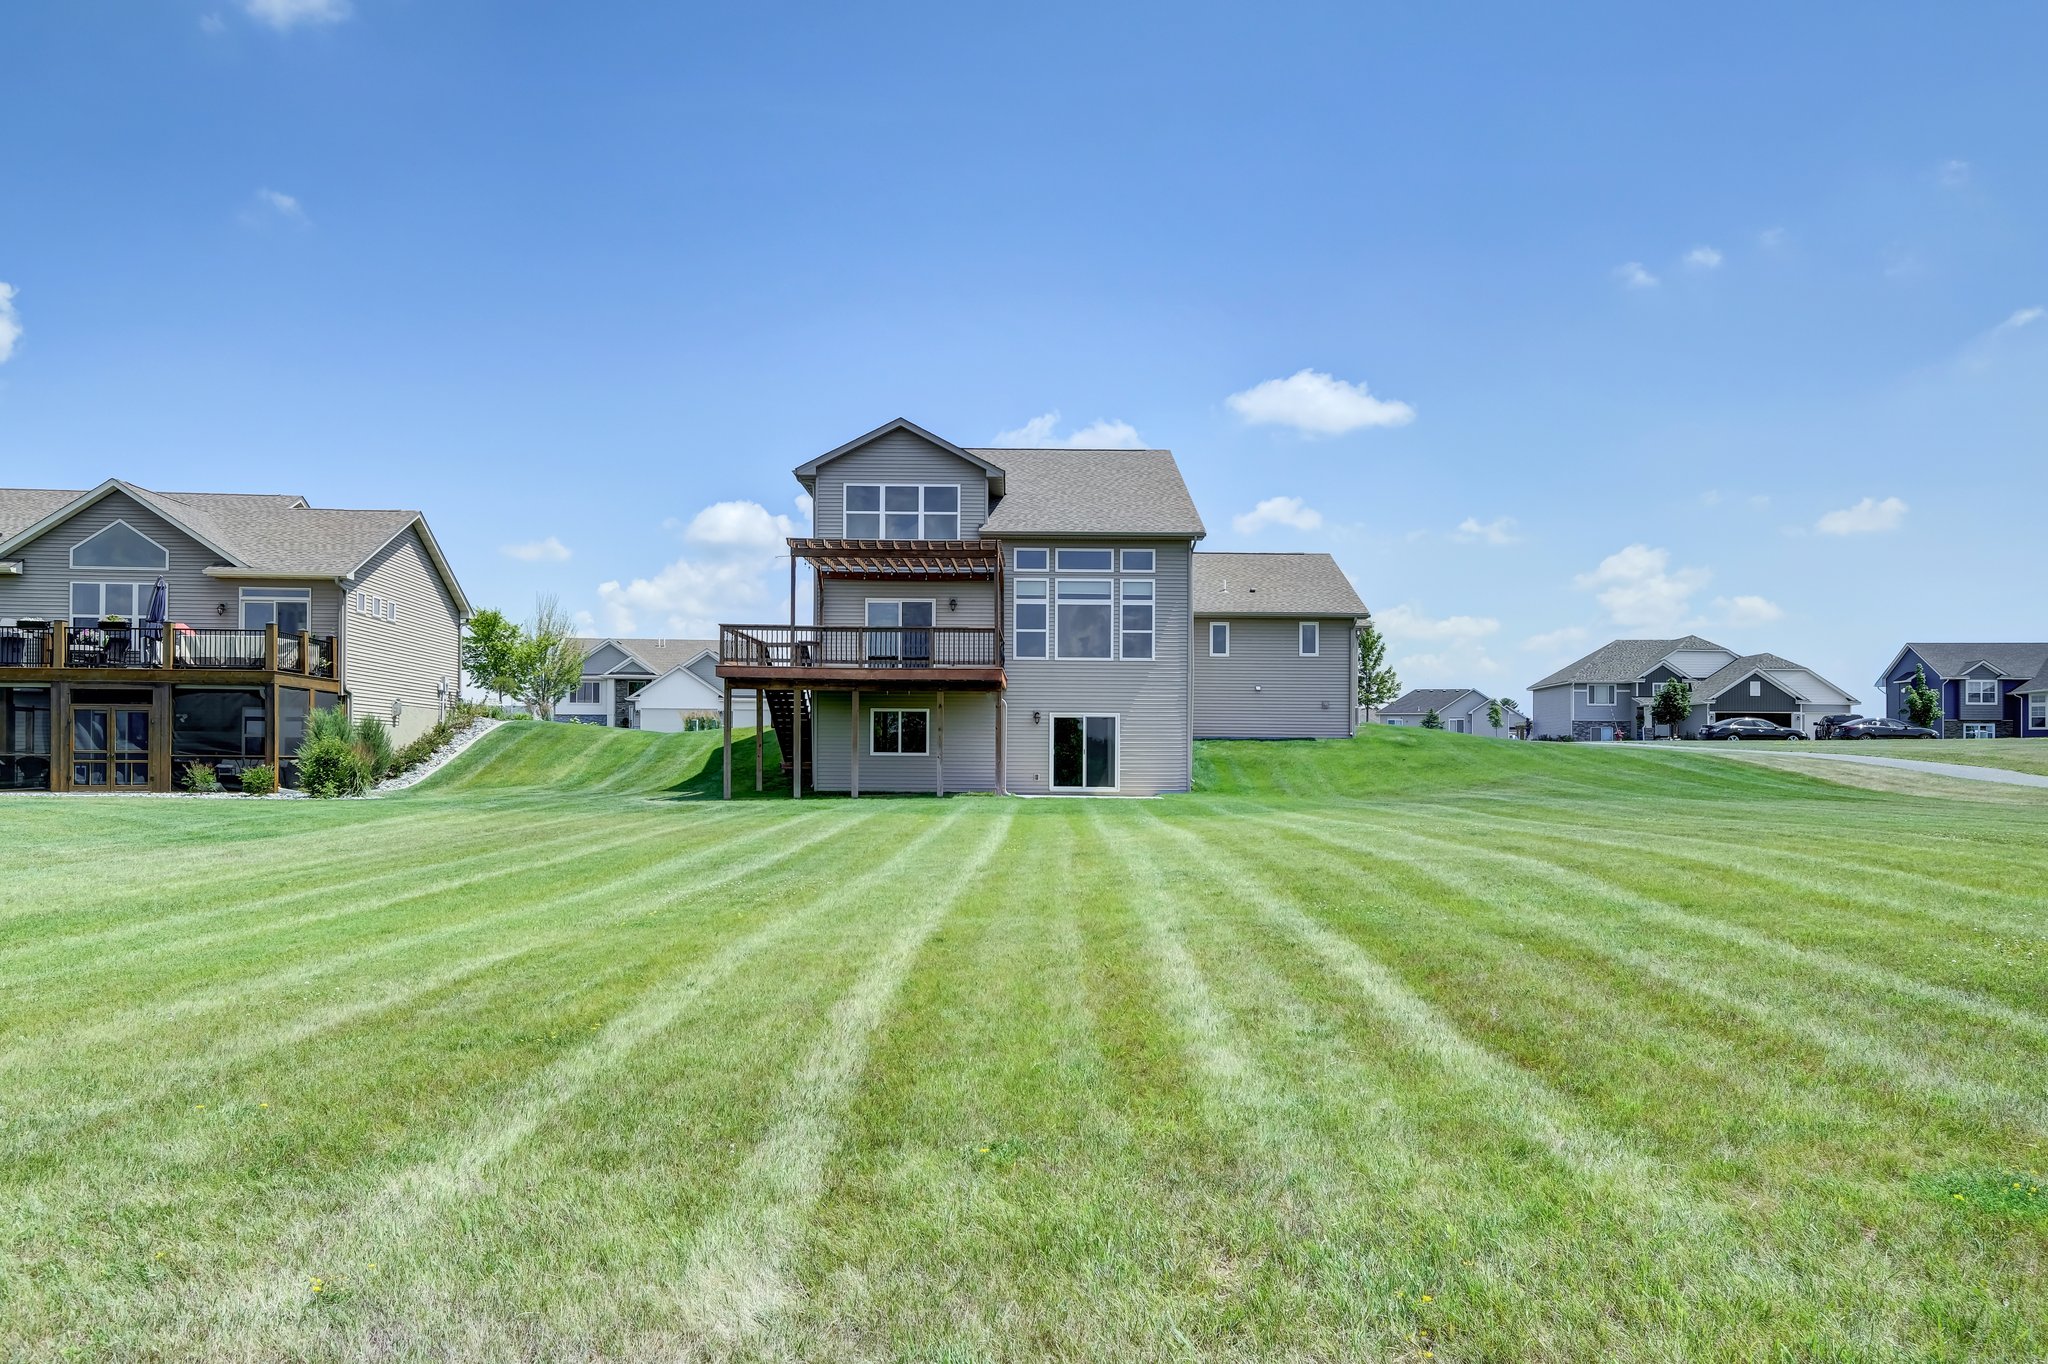  29268 Scenic Dr, Chisago City, MN 55013, US Photo 4